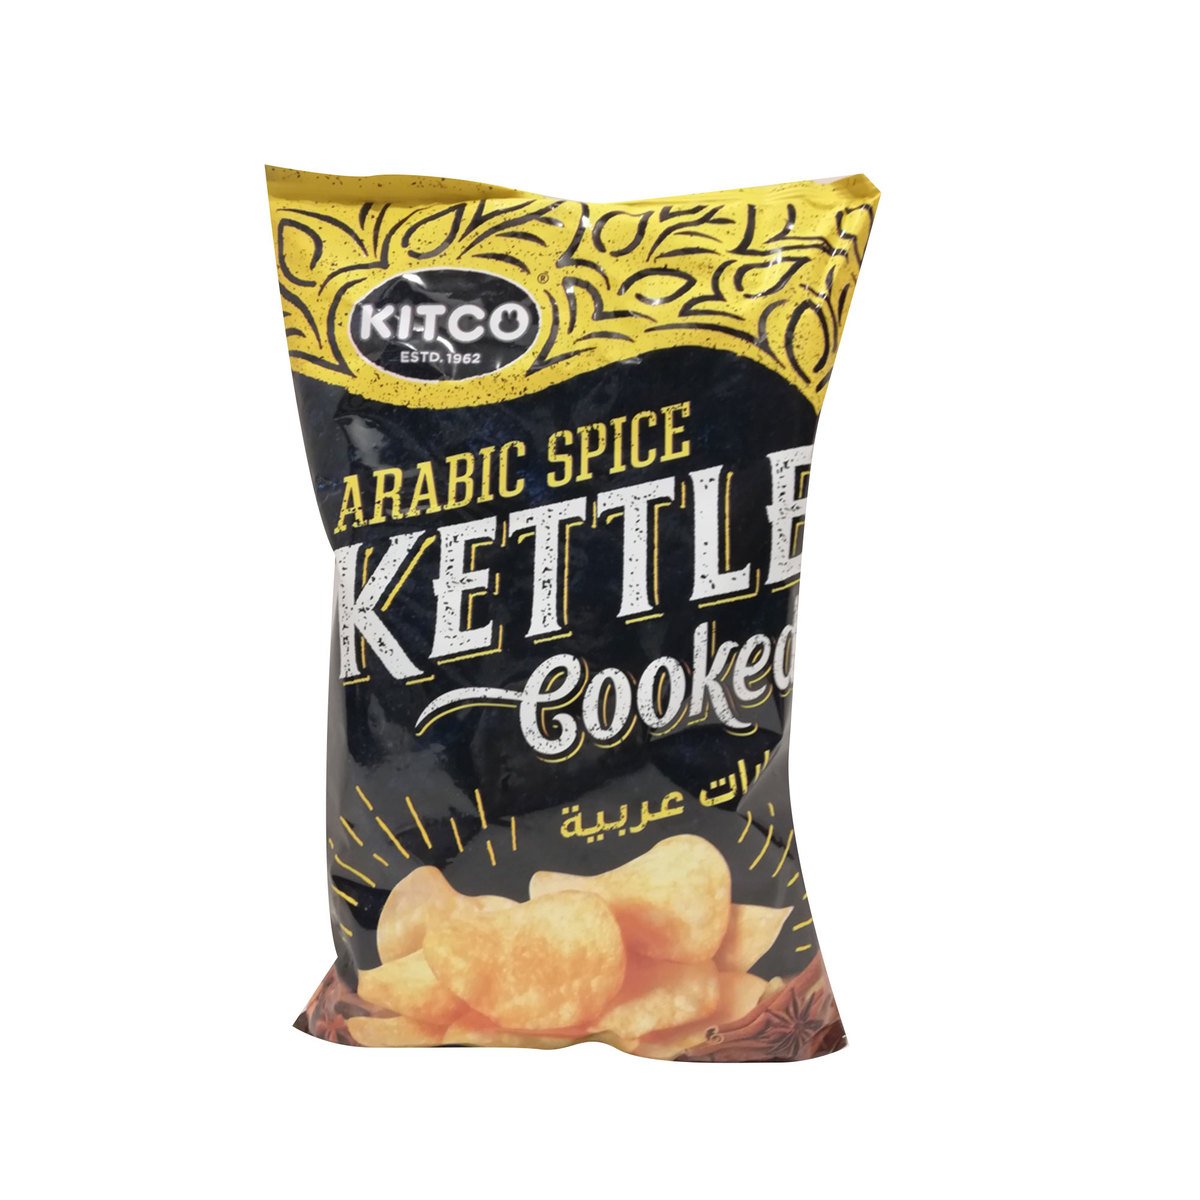 Kitco Kettle Cooked Potato Chips Arabic Spice 170g